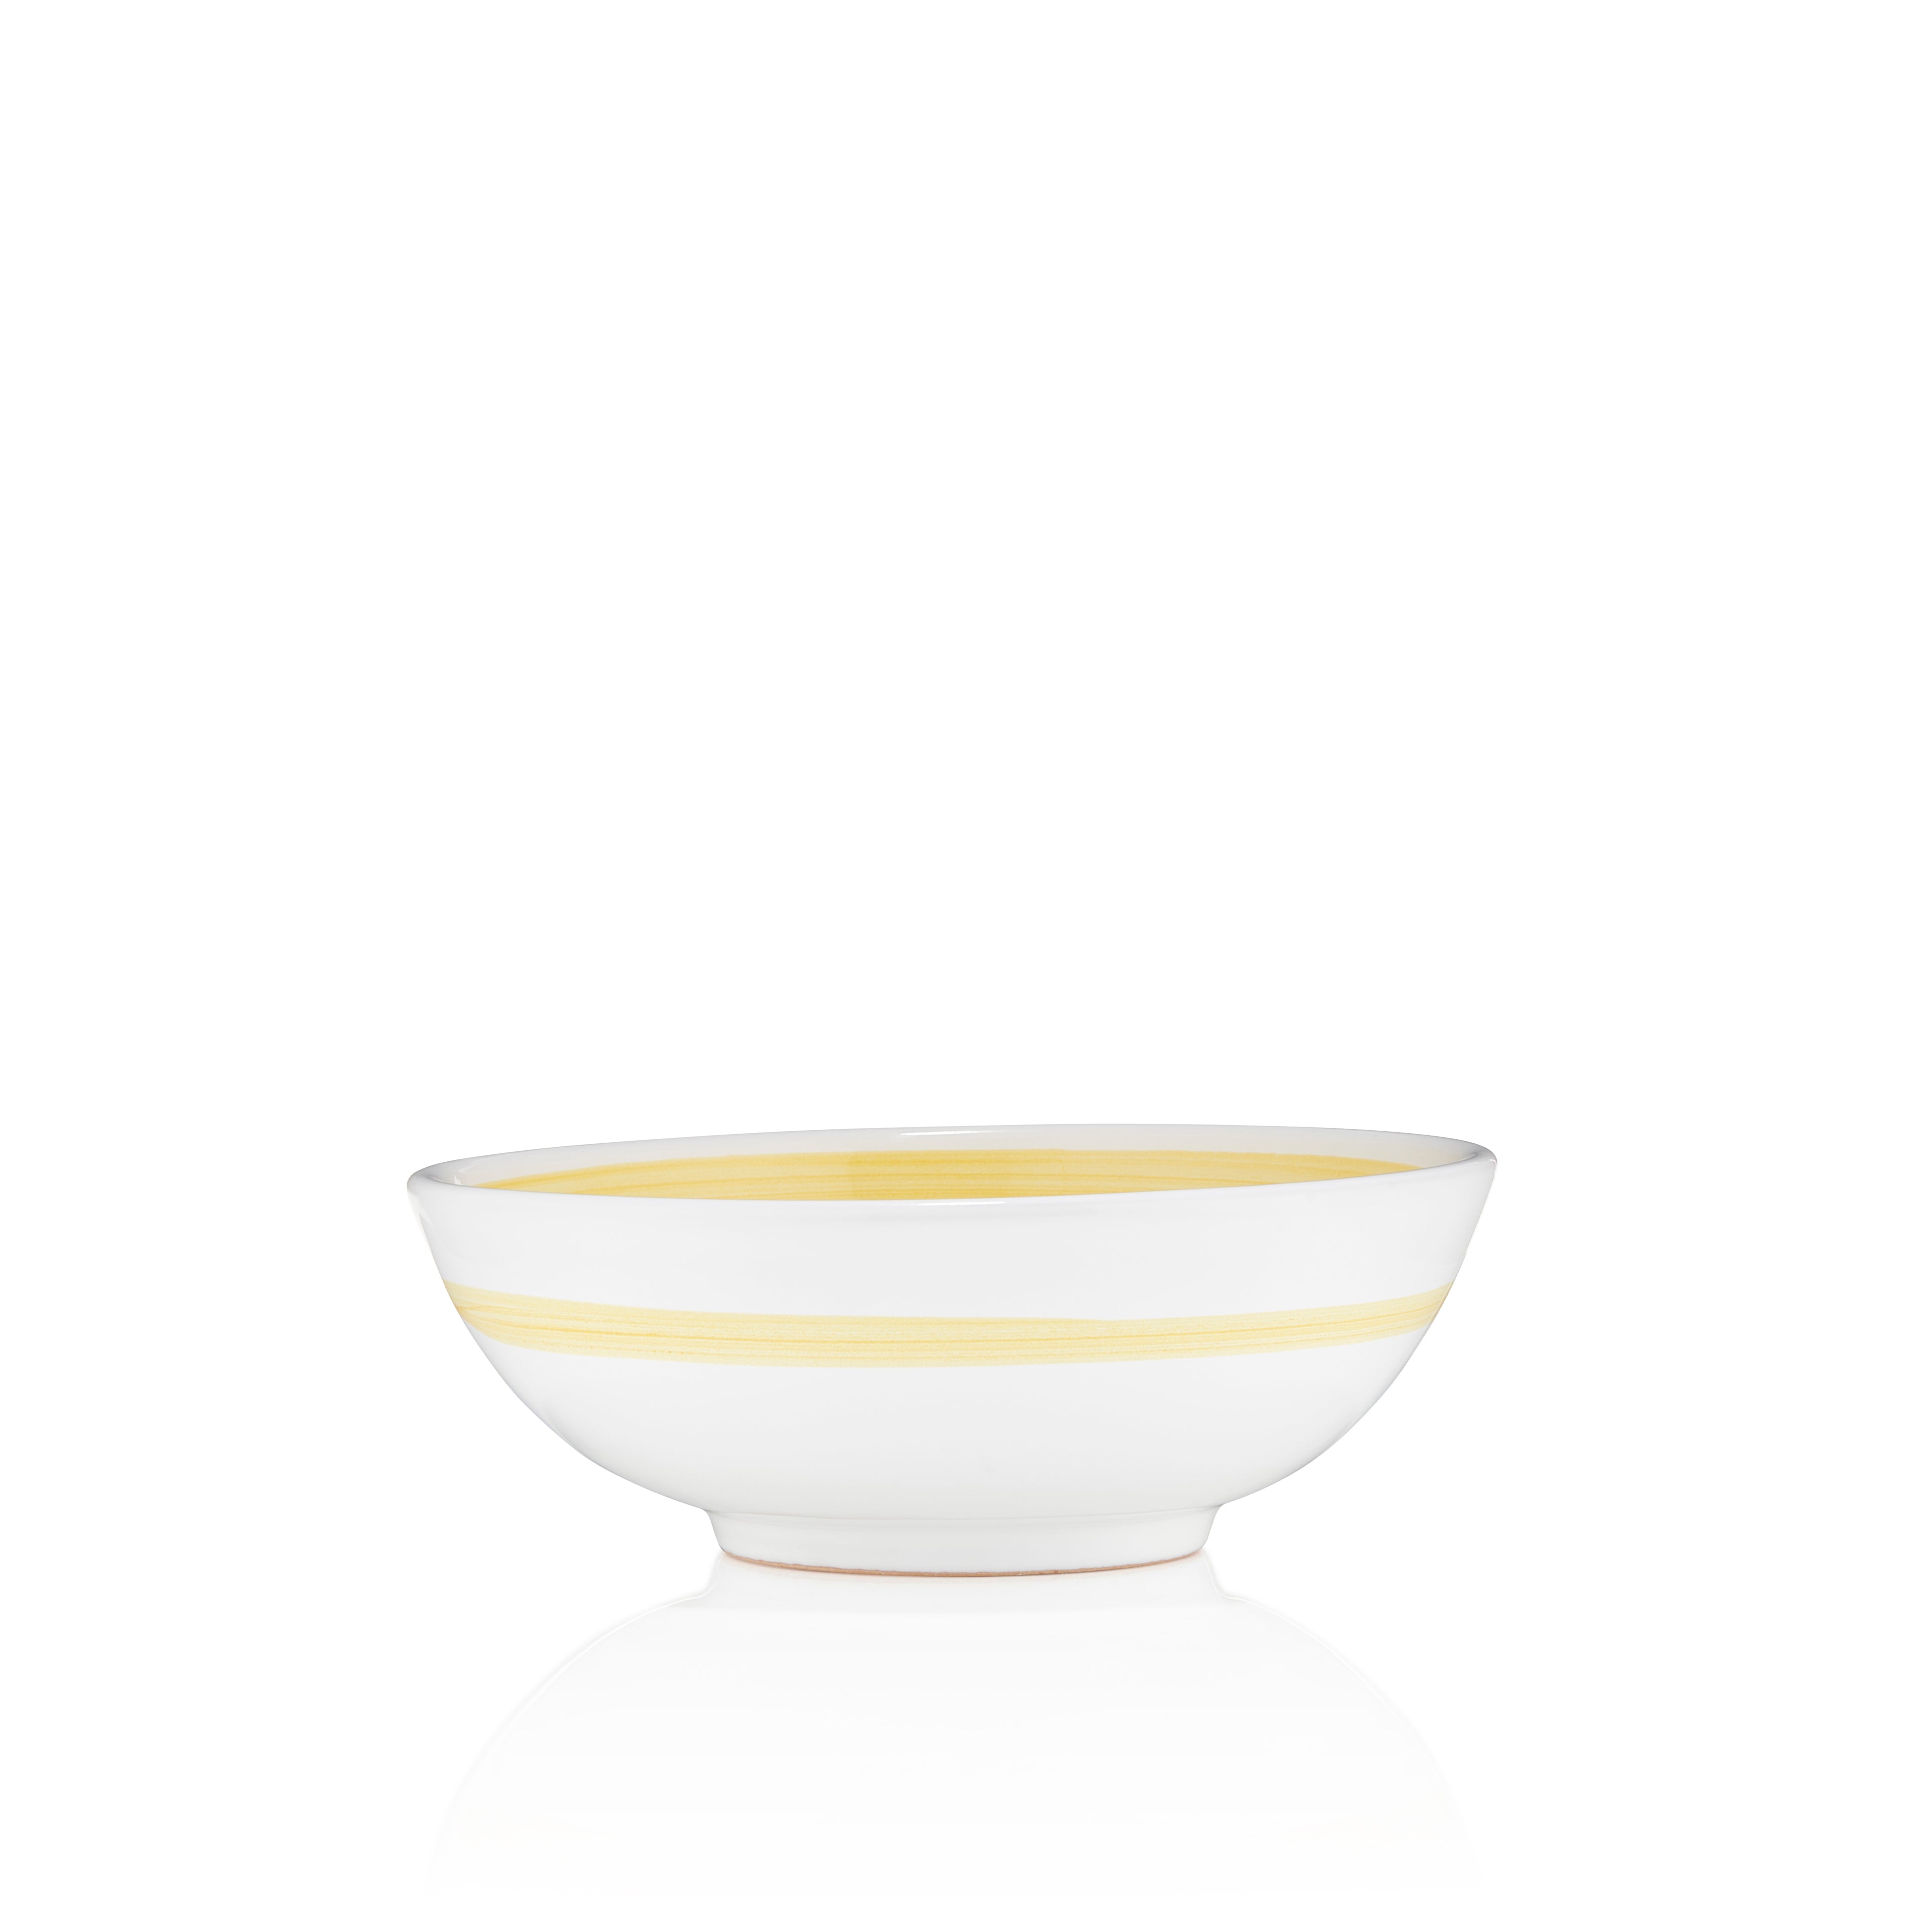 S&B 'Brushed' Ceramic Soup Bowl in Yellow, 16cm